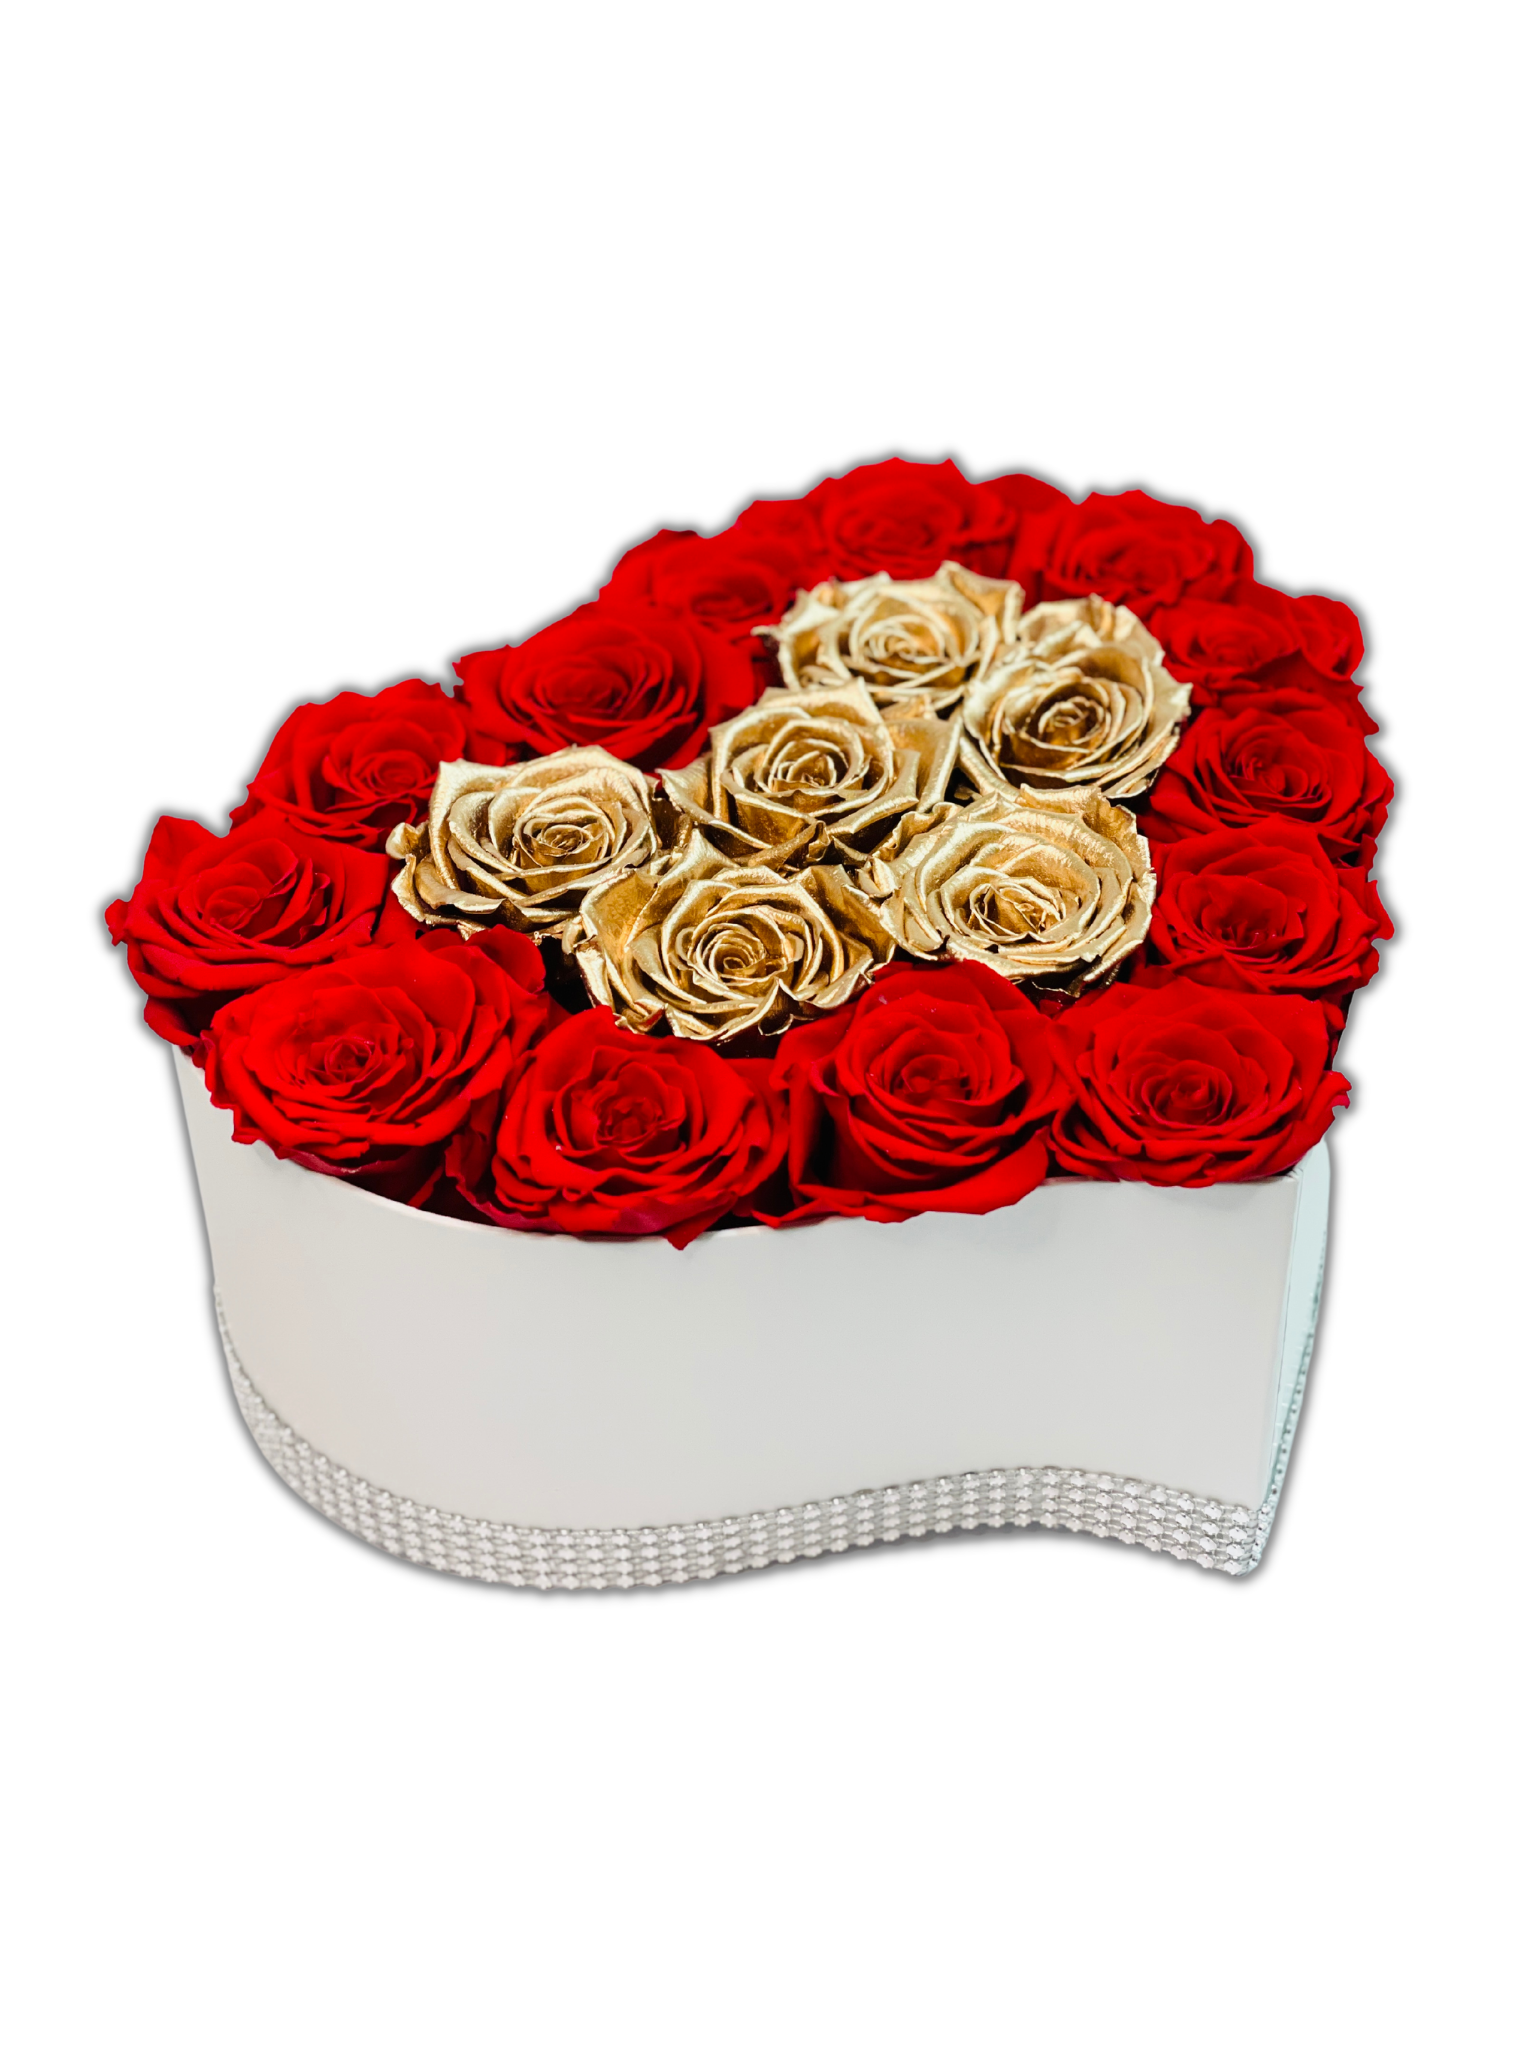 Heart-shaped Flower Box (18 Red Roses &Phalaenopsis, Pearls & Flowers) -  Shop Grand Floral & Gift Shop Plants - Pinkoi